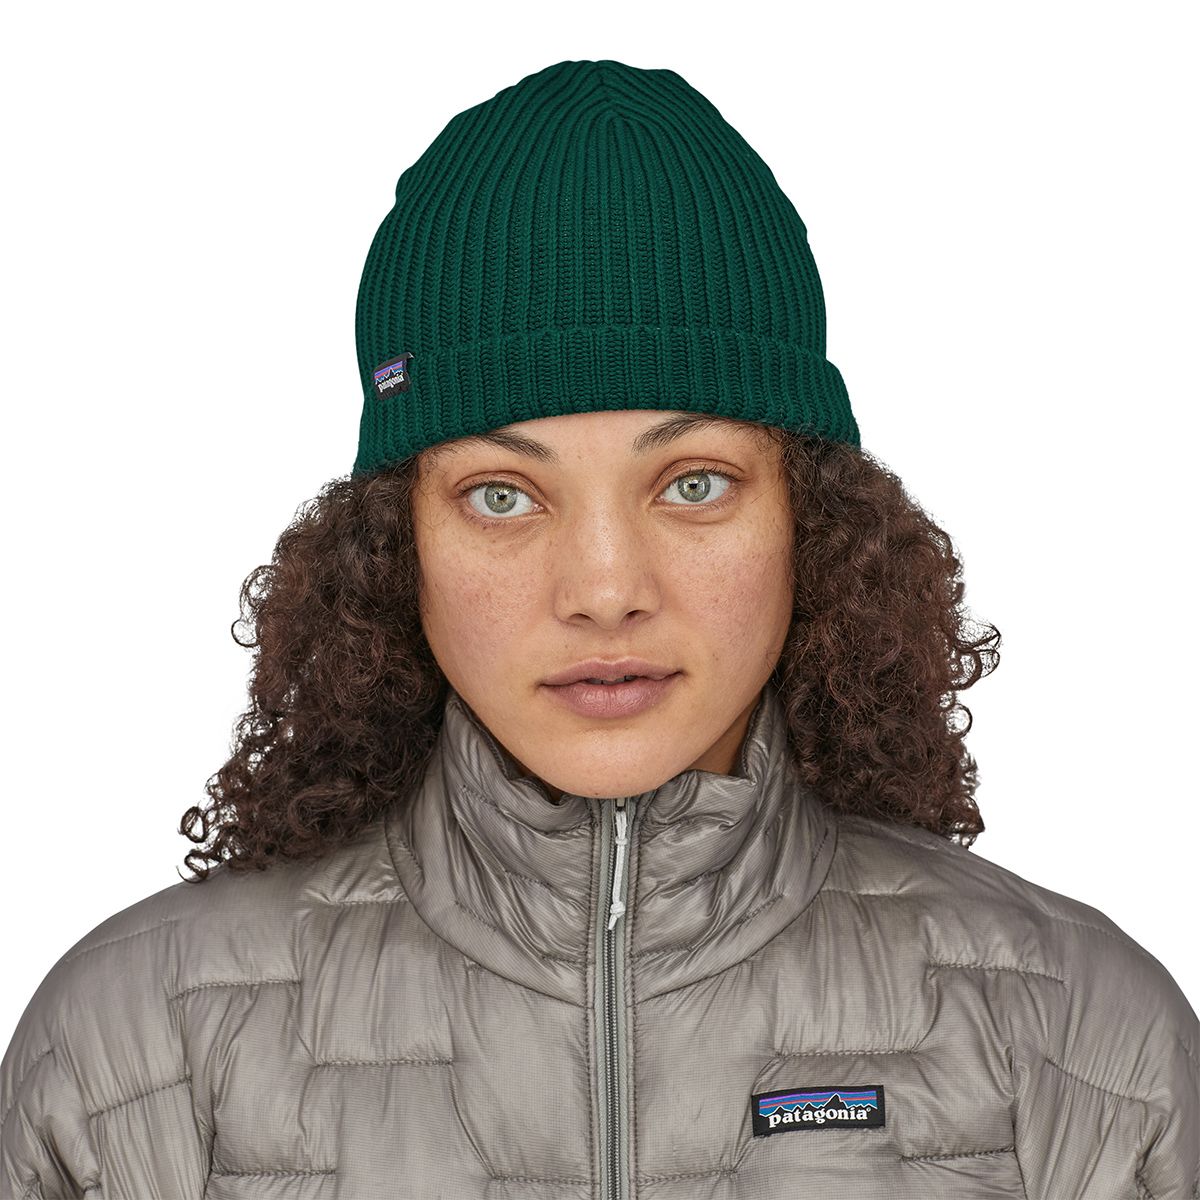 Patagonia Fishermans Rolled Beanie | Backcountry.com